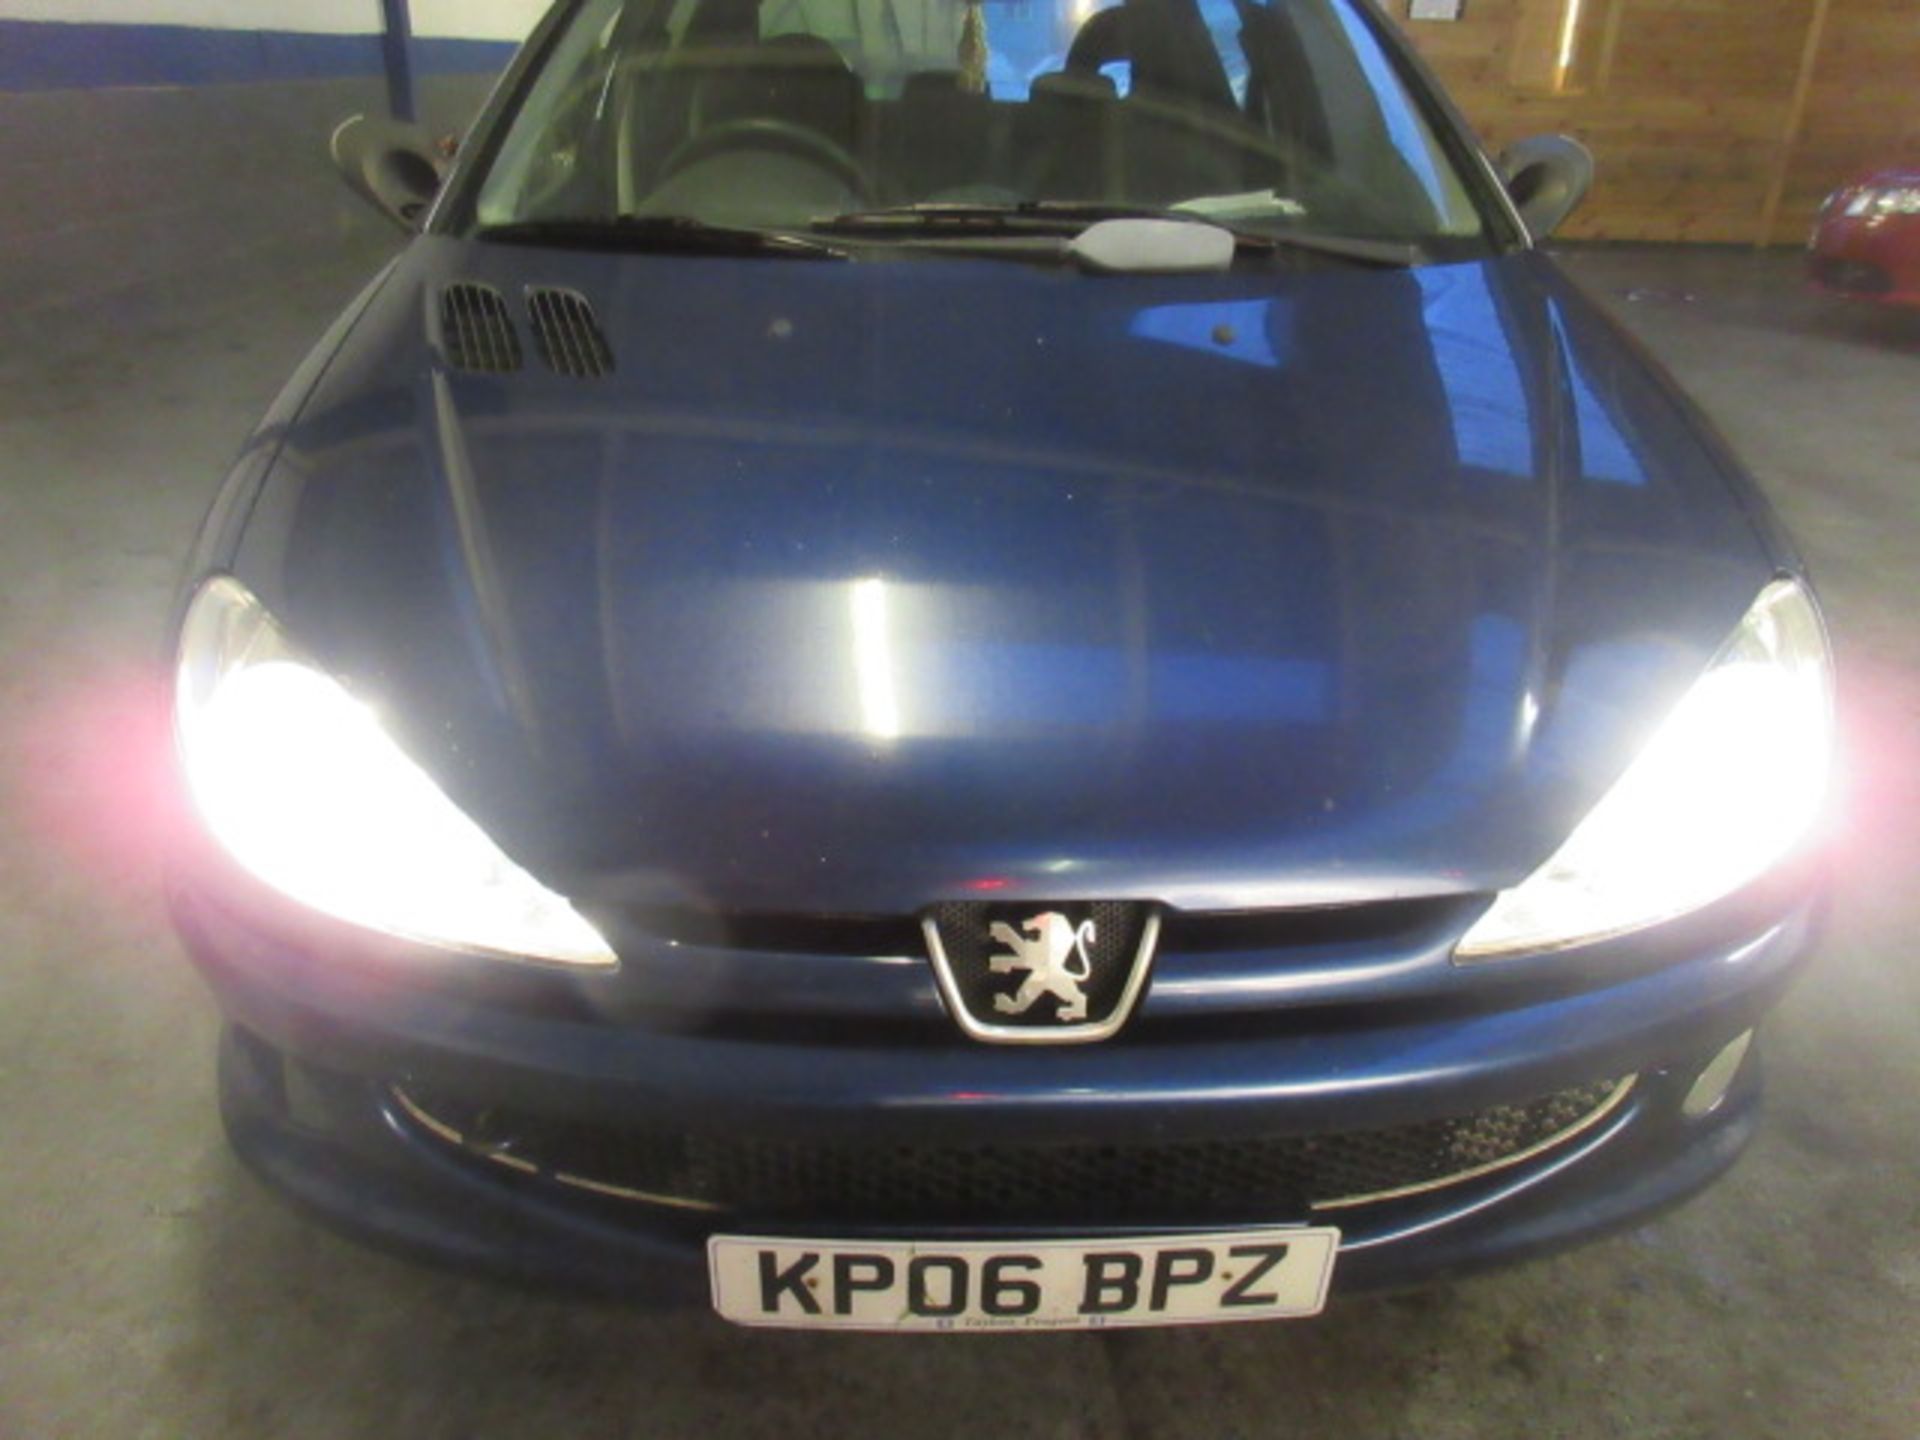 06 06 Peugeot 206 Verve HDI - Image 2 of 14